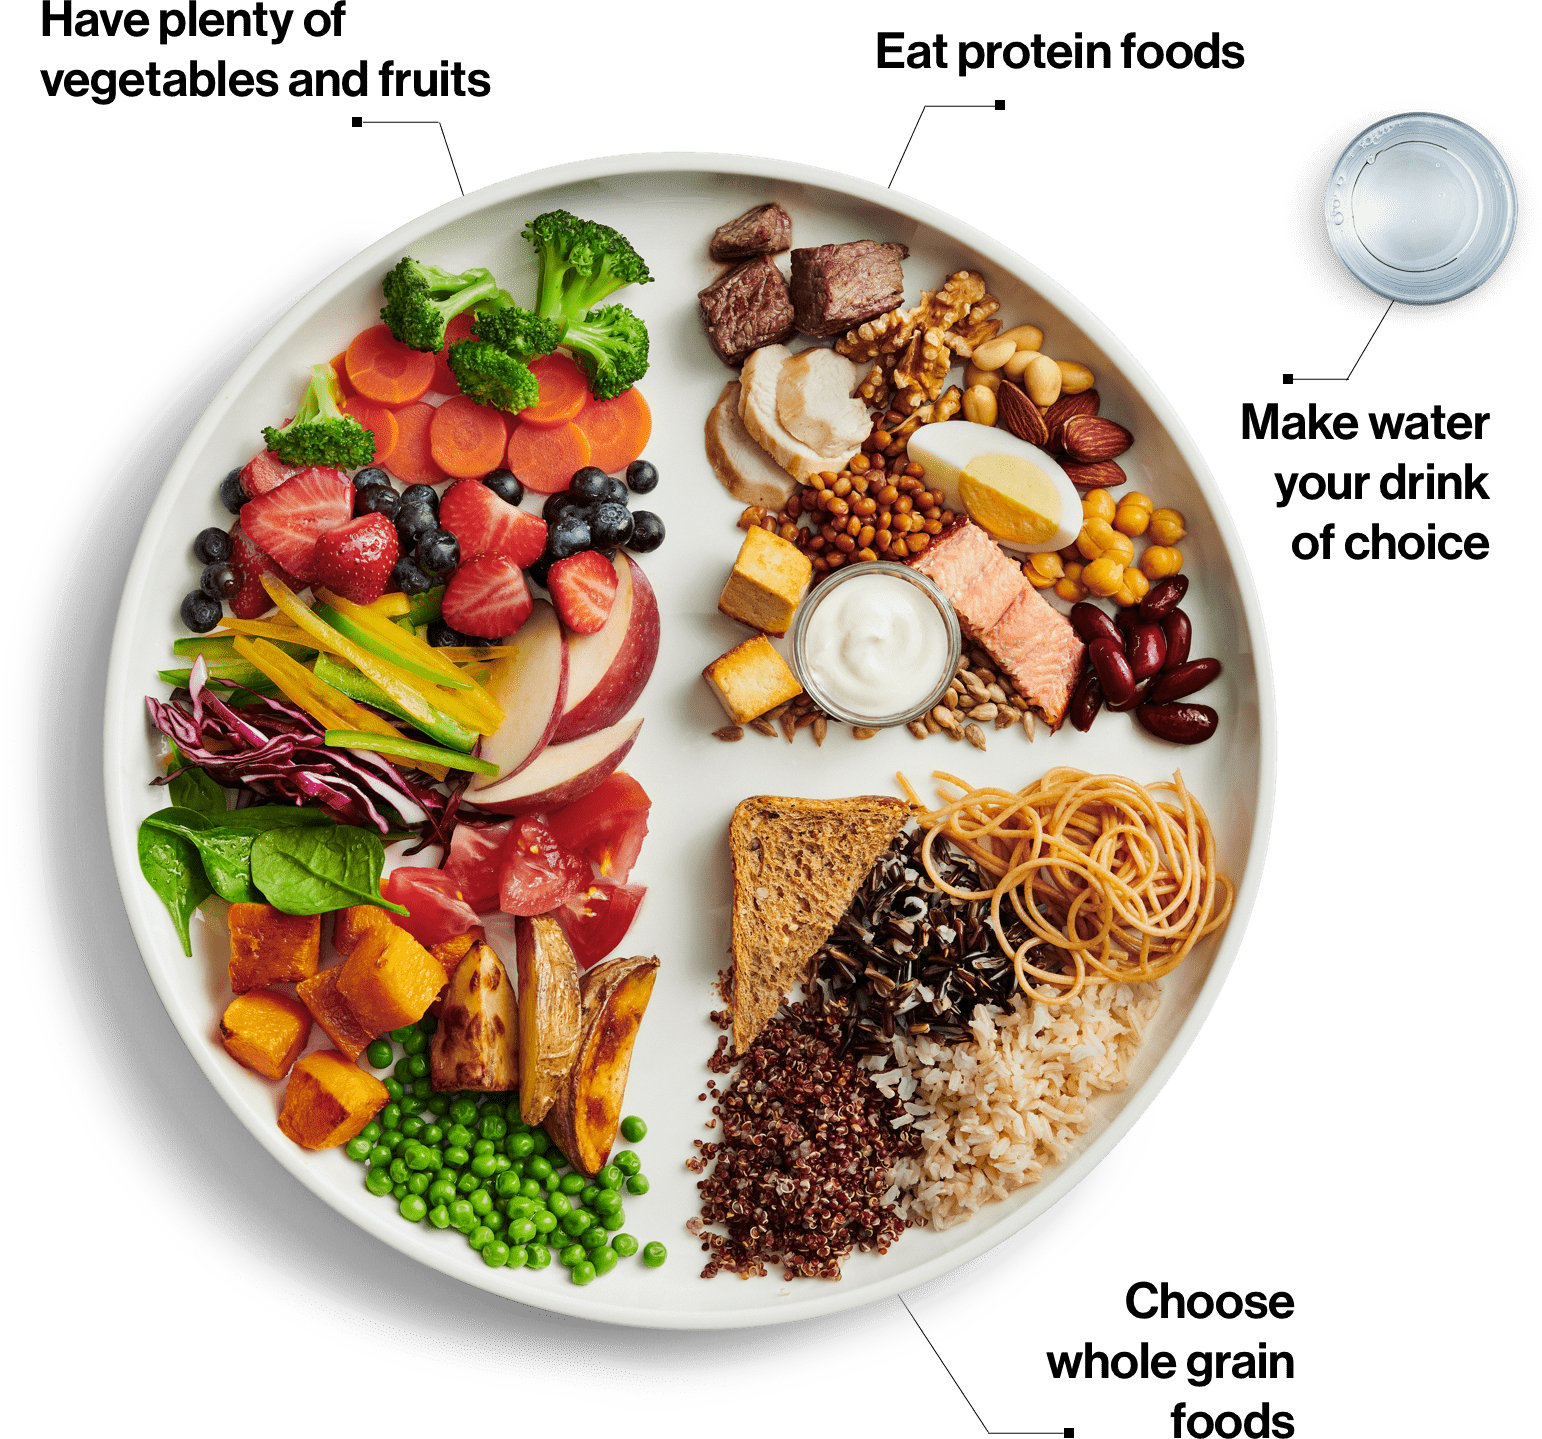 The New Canada Food Guide 2019 recommends whole-grains, plant-based proteins. A picture of a plate showing how you should eat